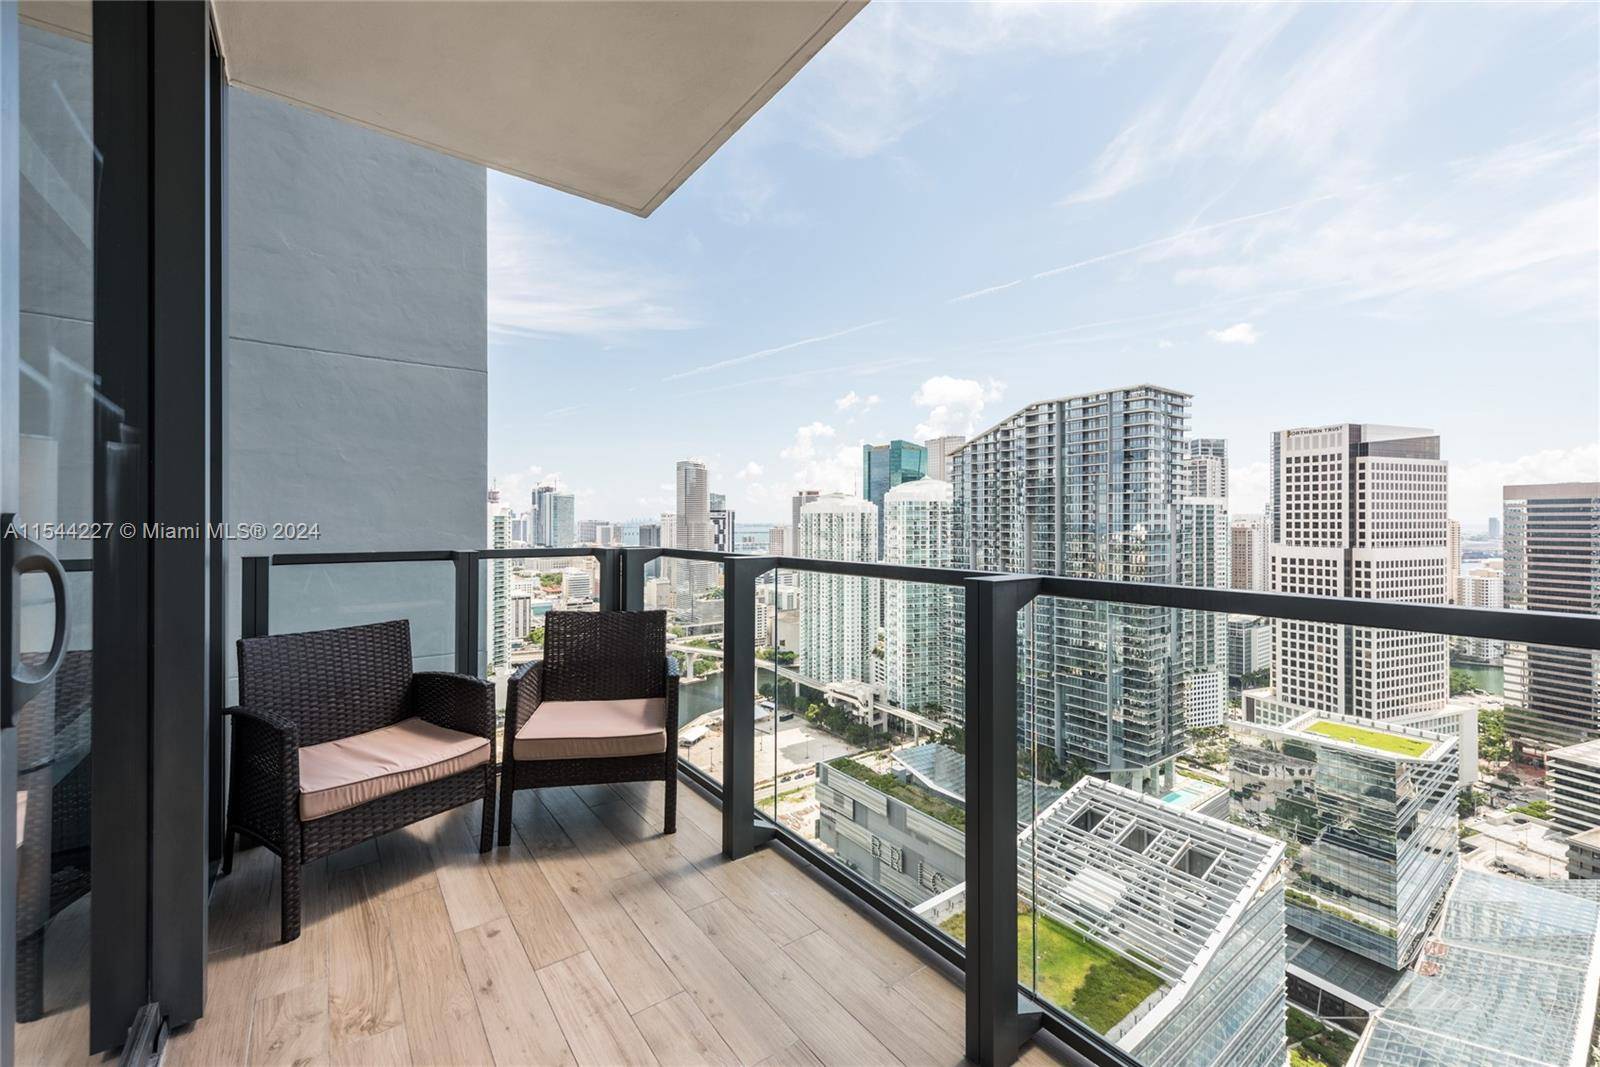 Welcome to luxury living at its finest in the heart of Brickell.